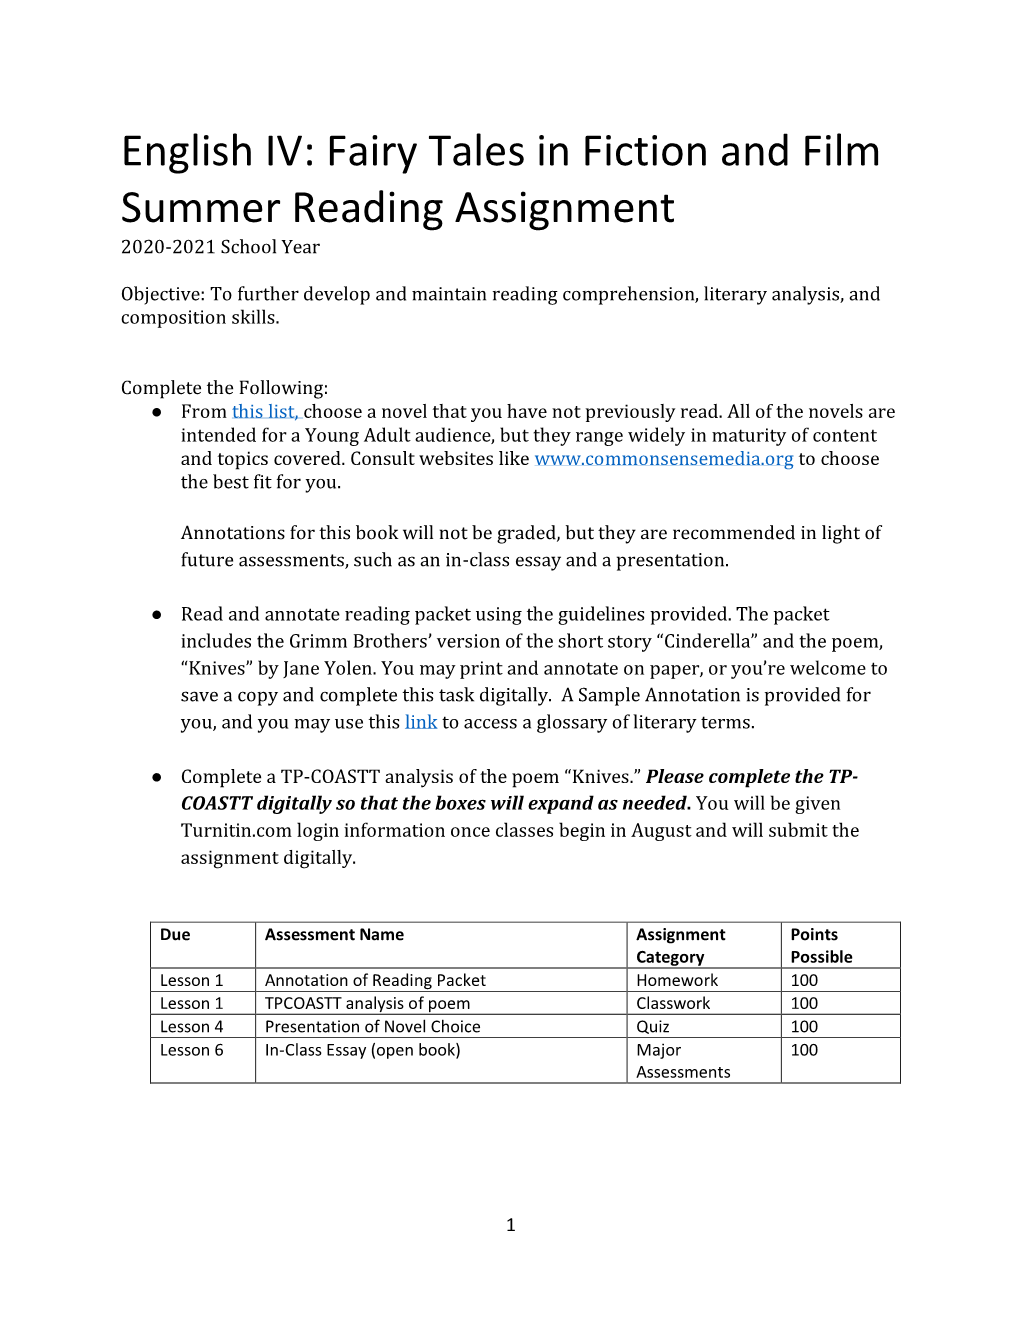 English IV: Fairy Tales in Fiction and Film Summer Reading Assignment 2020-2021 School Year